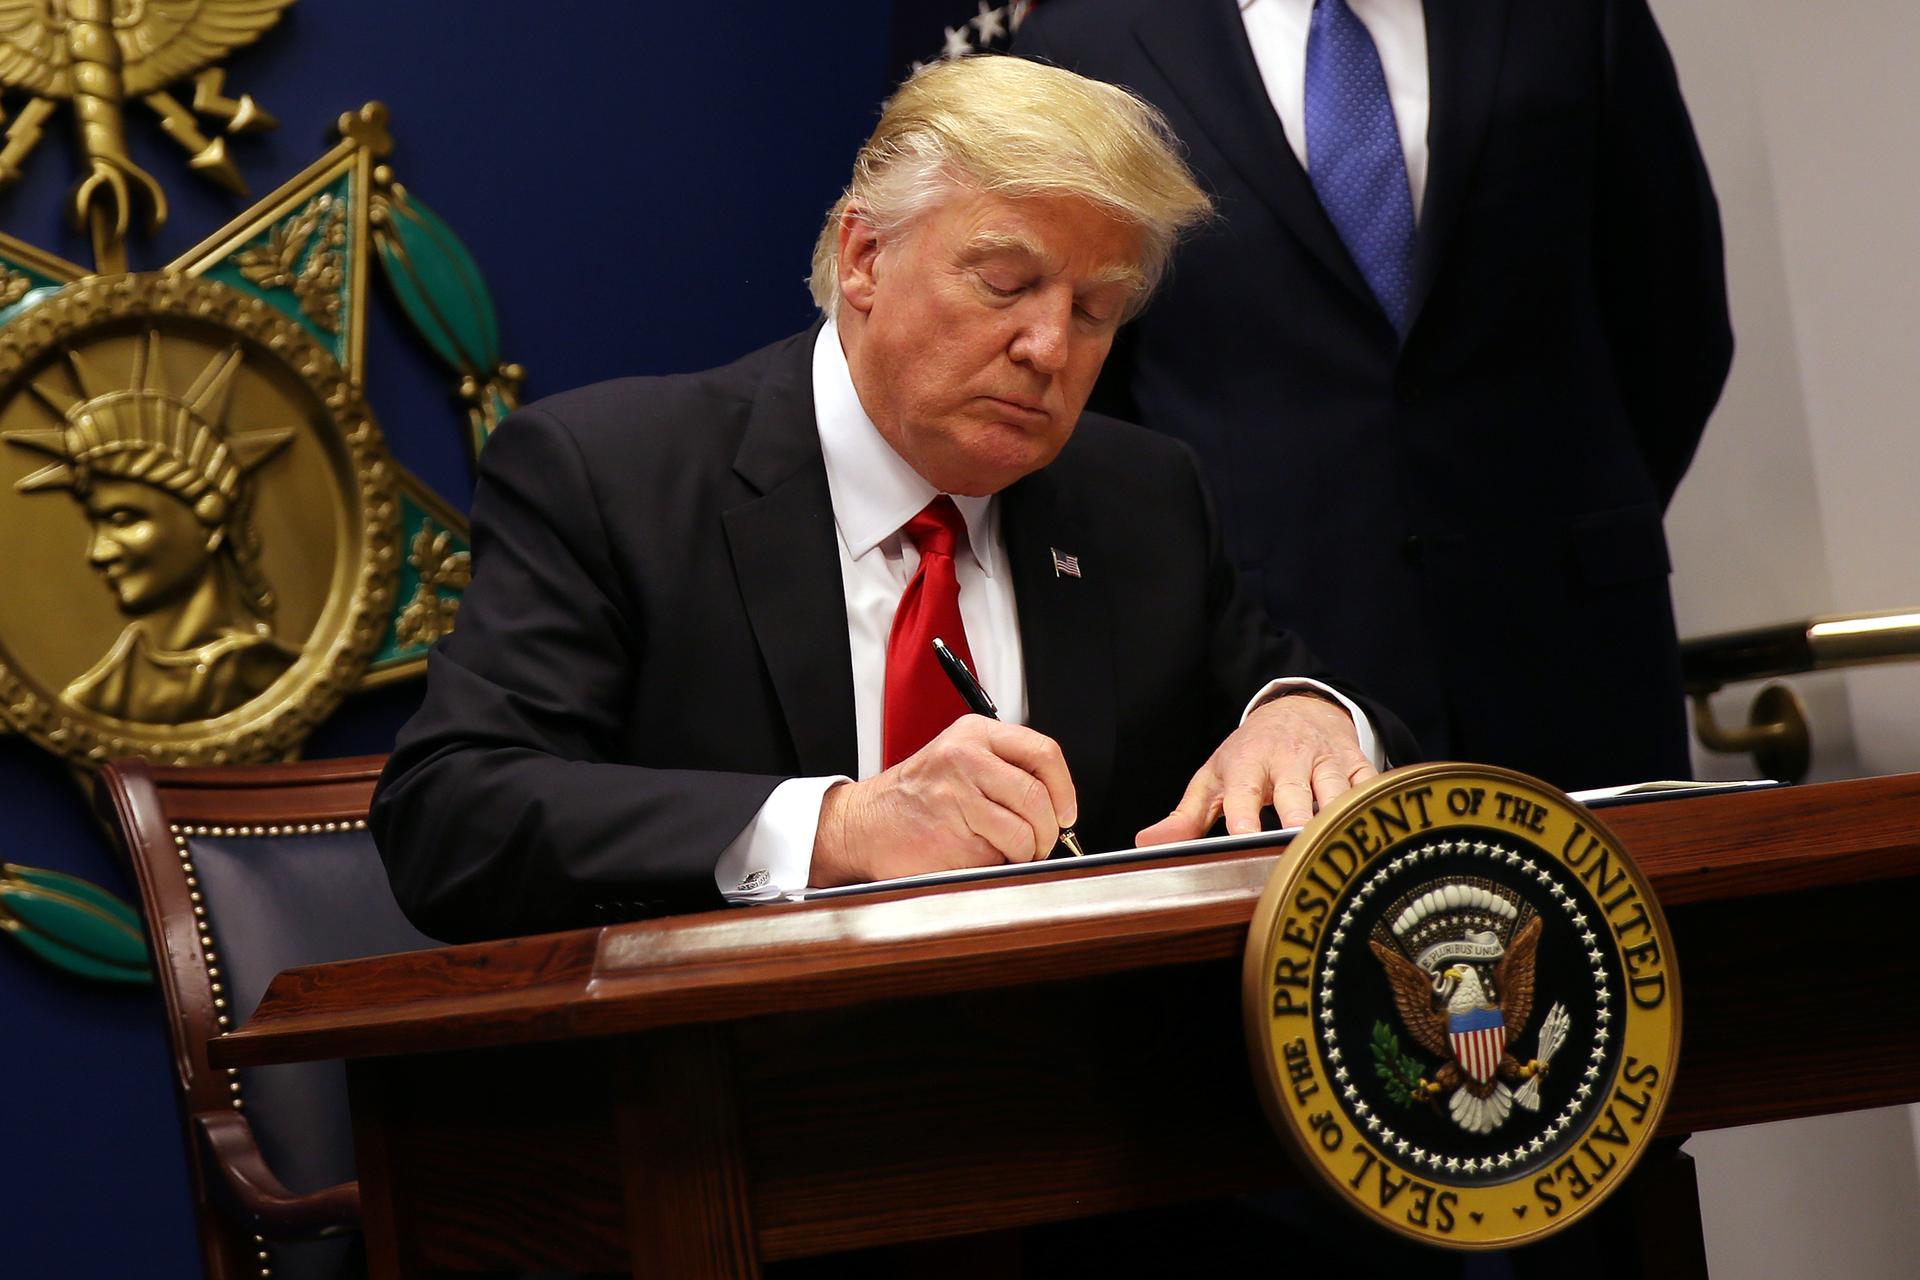 President Donald Trump signs an executive order to impose tighter vetting of travelers entering the United States, at the Pentagon in Washington, D.C.